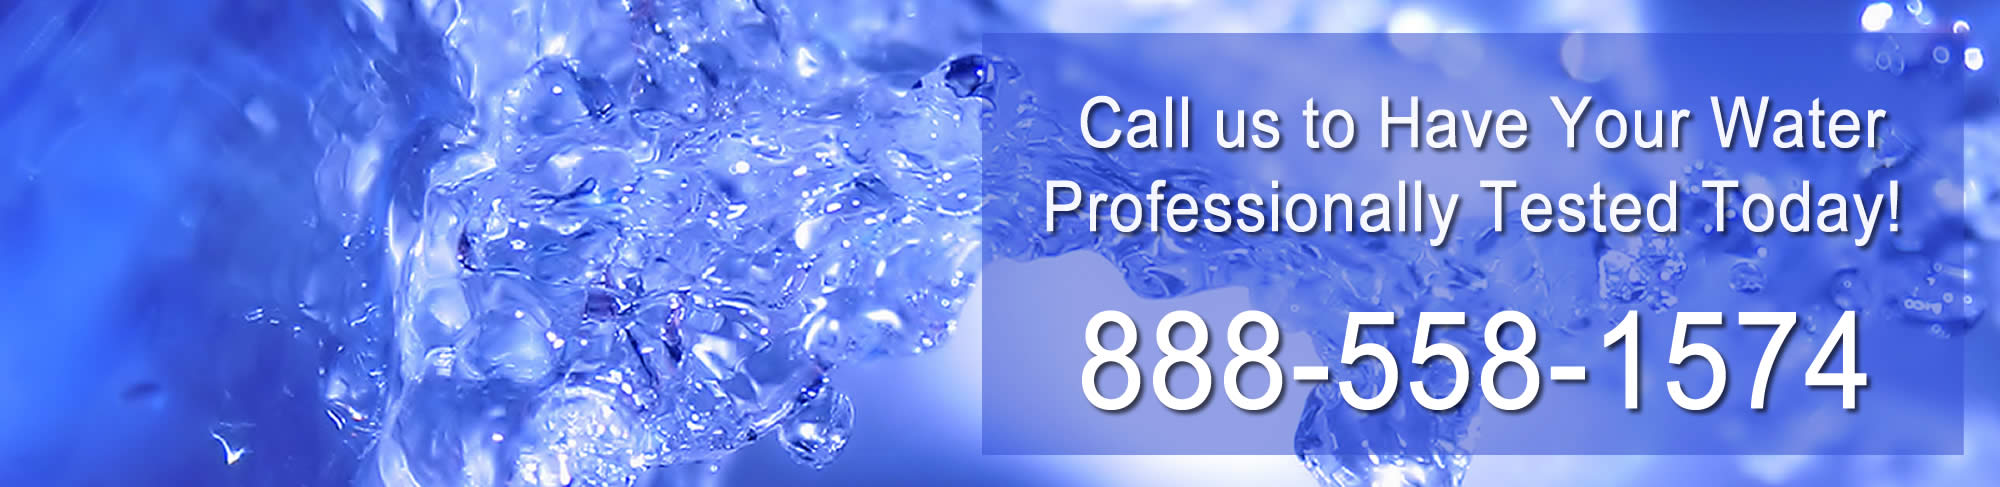 Specializing in East Granby CT Water Testing and Analysis